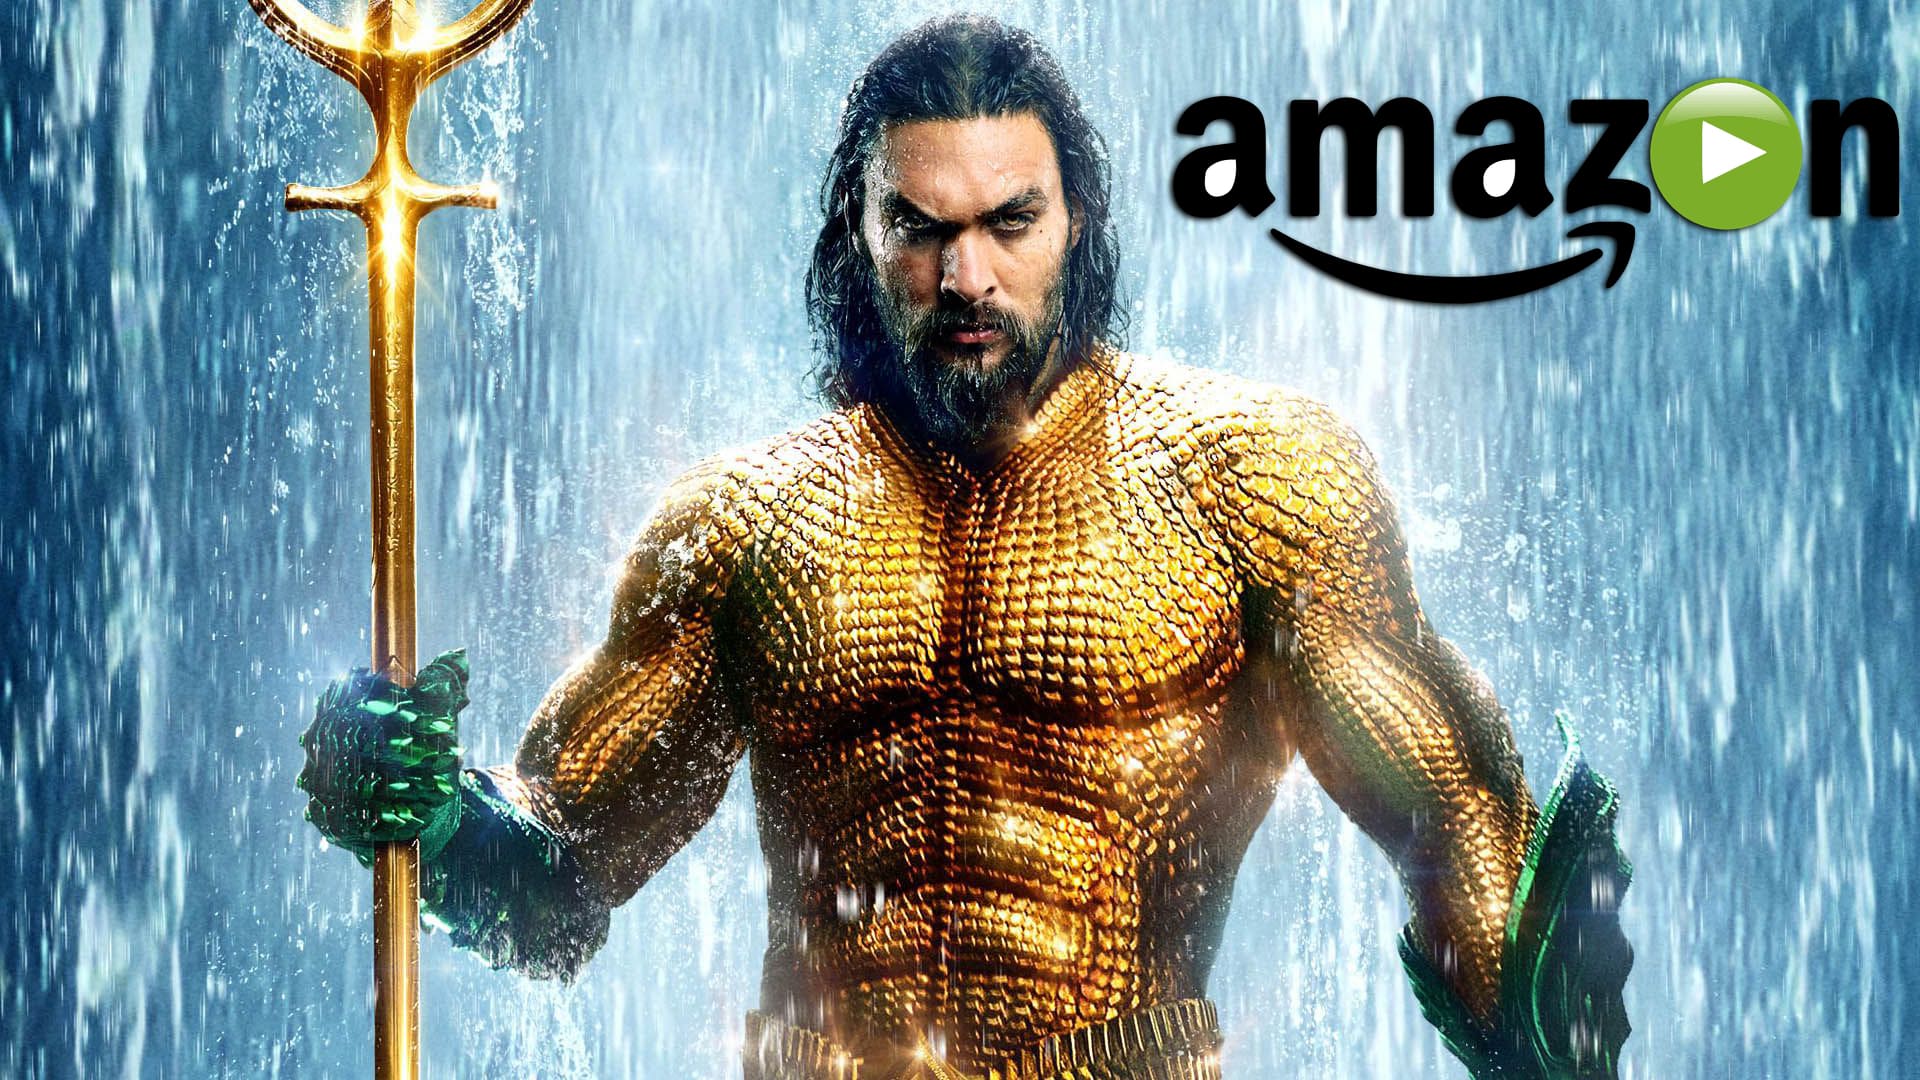 DC’s Aquaman: ‘Amazon Prime’ Members Can Watch The Film 5 Days Early